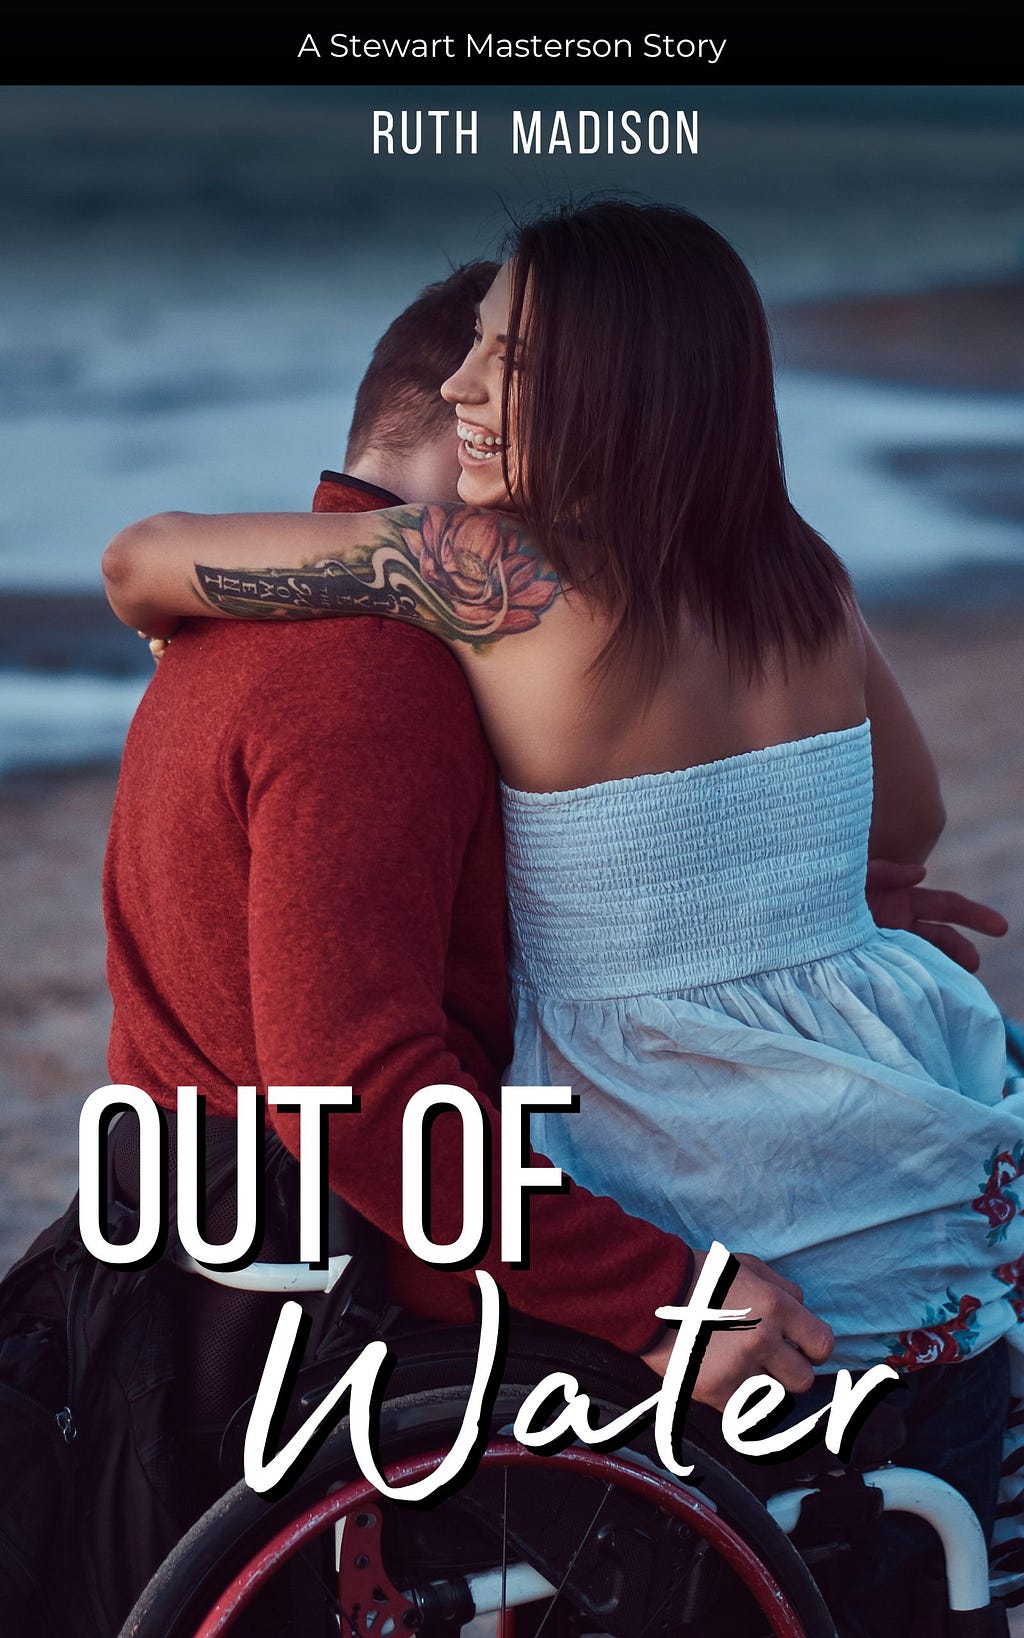 Out Of Water. A Stewart Masterson Story. By Ruth Madison. A man in a wheelchair on the beach with a woman on his lap